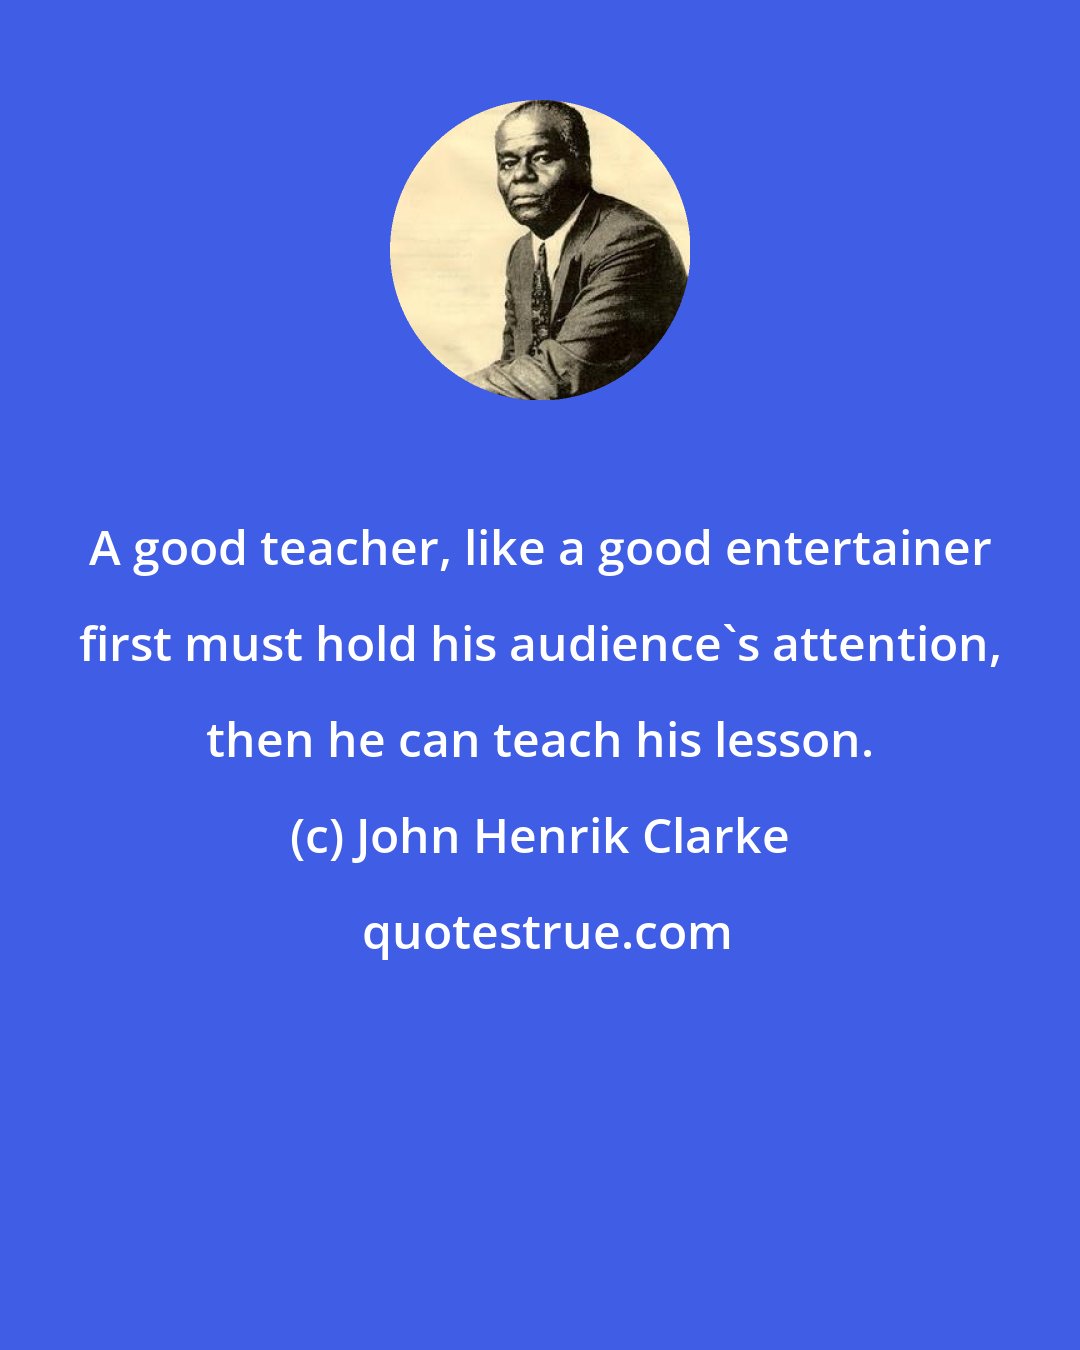 John Henrik Clarke: A good teacher, like a good entertainer first must hold his audience's attention, then he can teach his lesson.